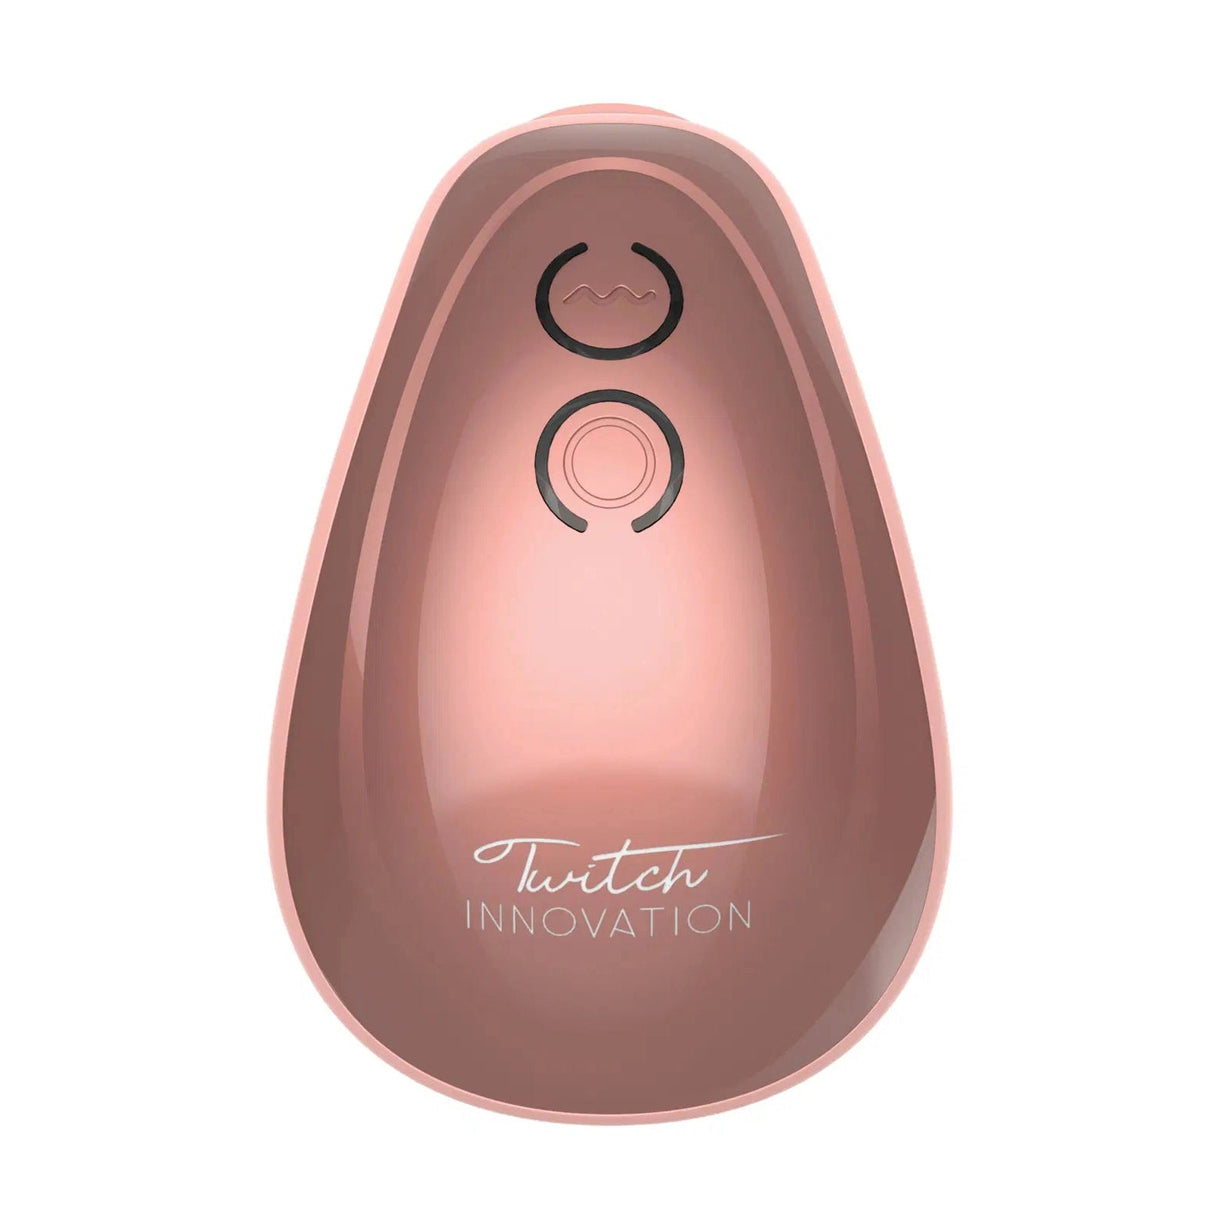 Shots Twitch Innovation Hands Free Suction & Vibration Toy